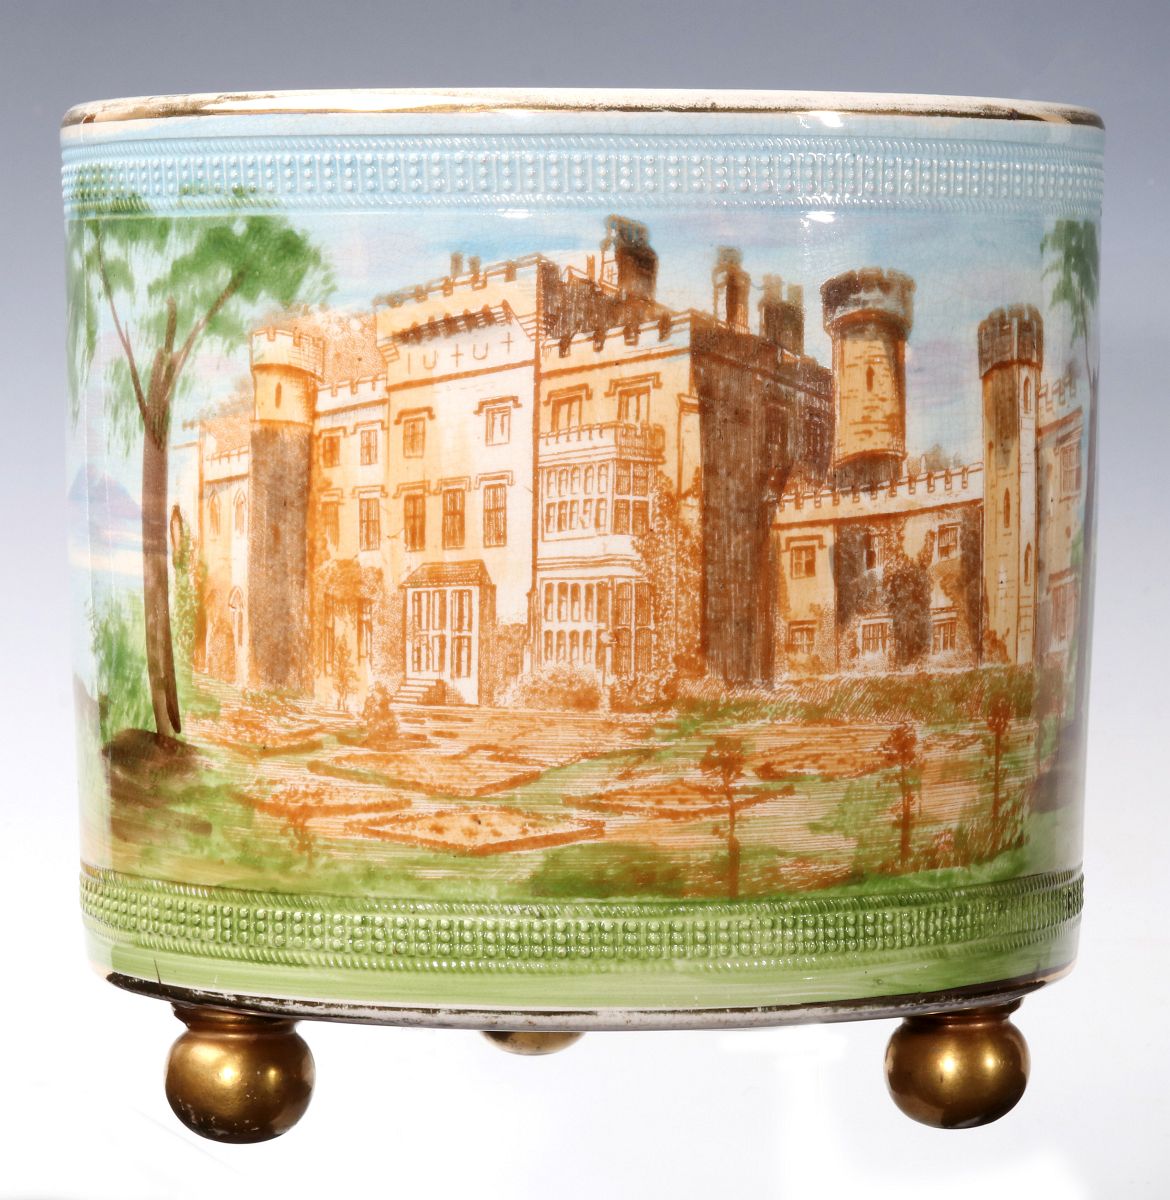 A 19TH CENTURY ENGLISH POTTERY FOOTED JARDINIERE